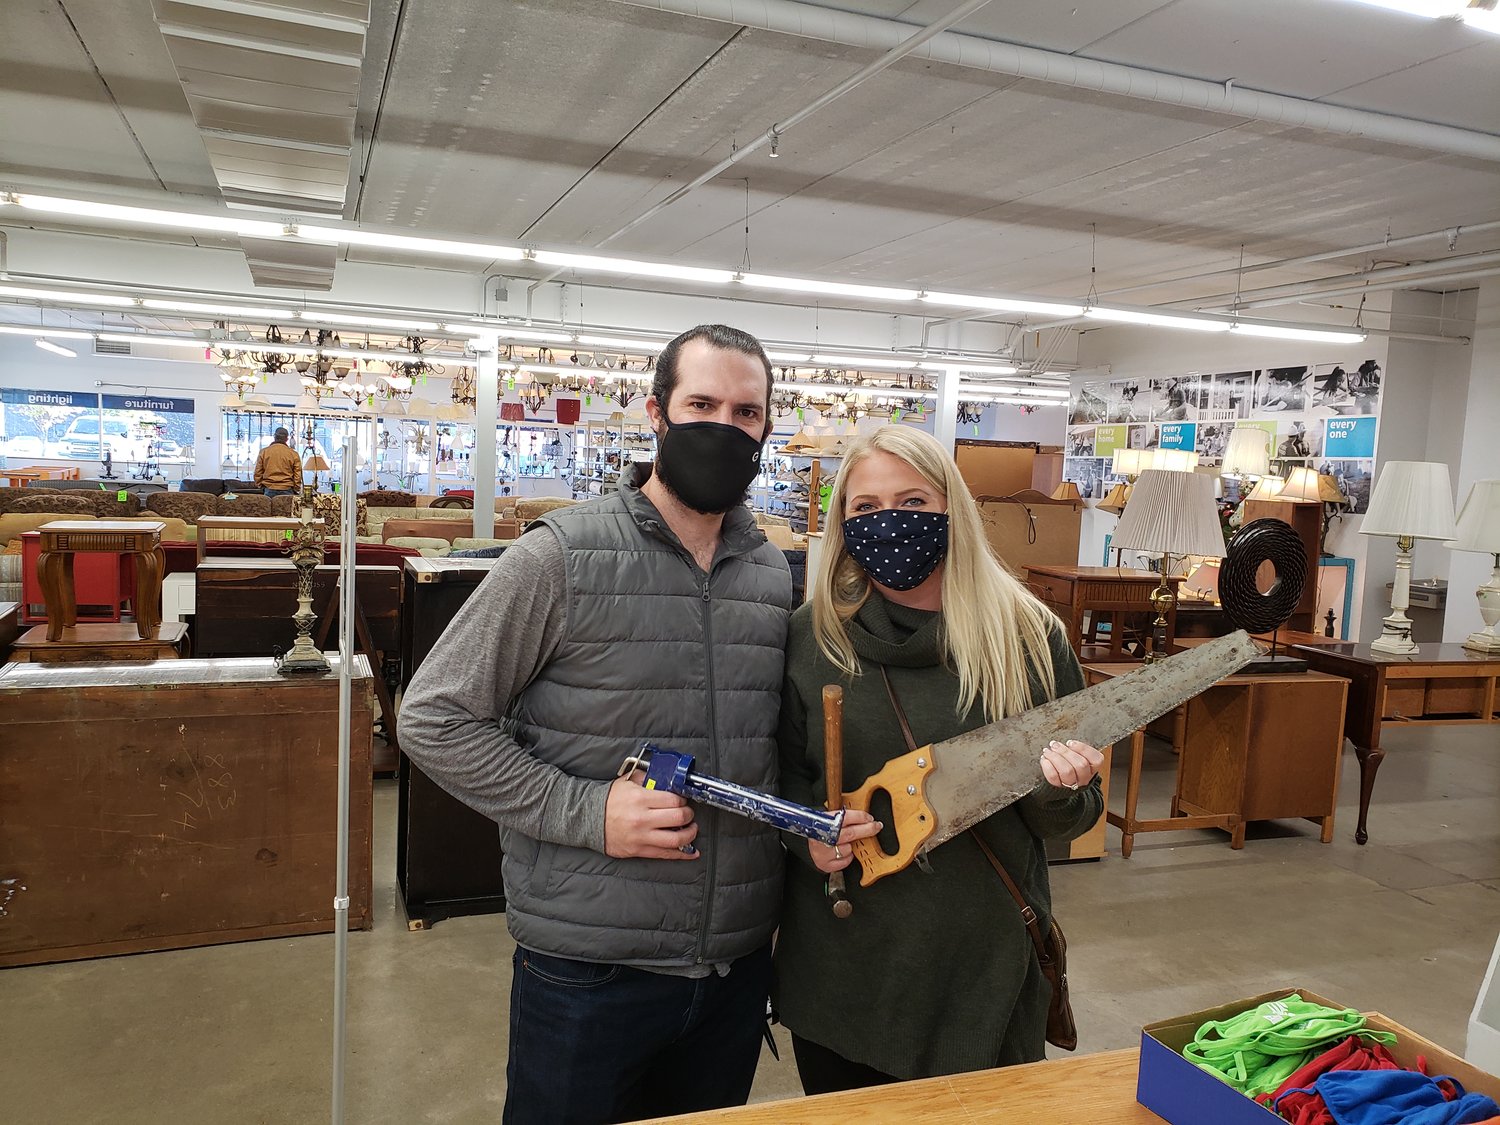 Shoppers check out tools and building materials at the Minneapolis ReStore location. (Photo submitted)